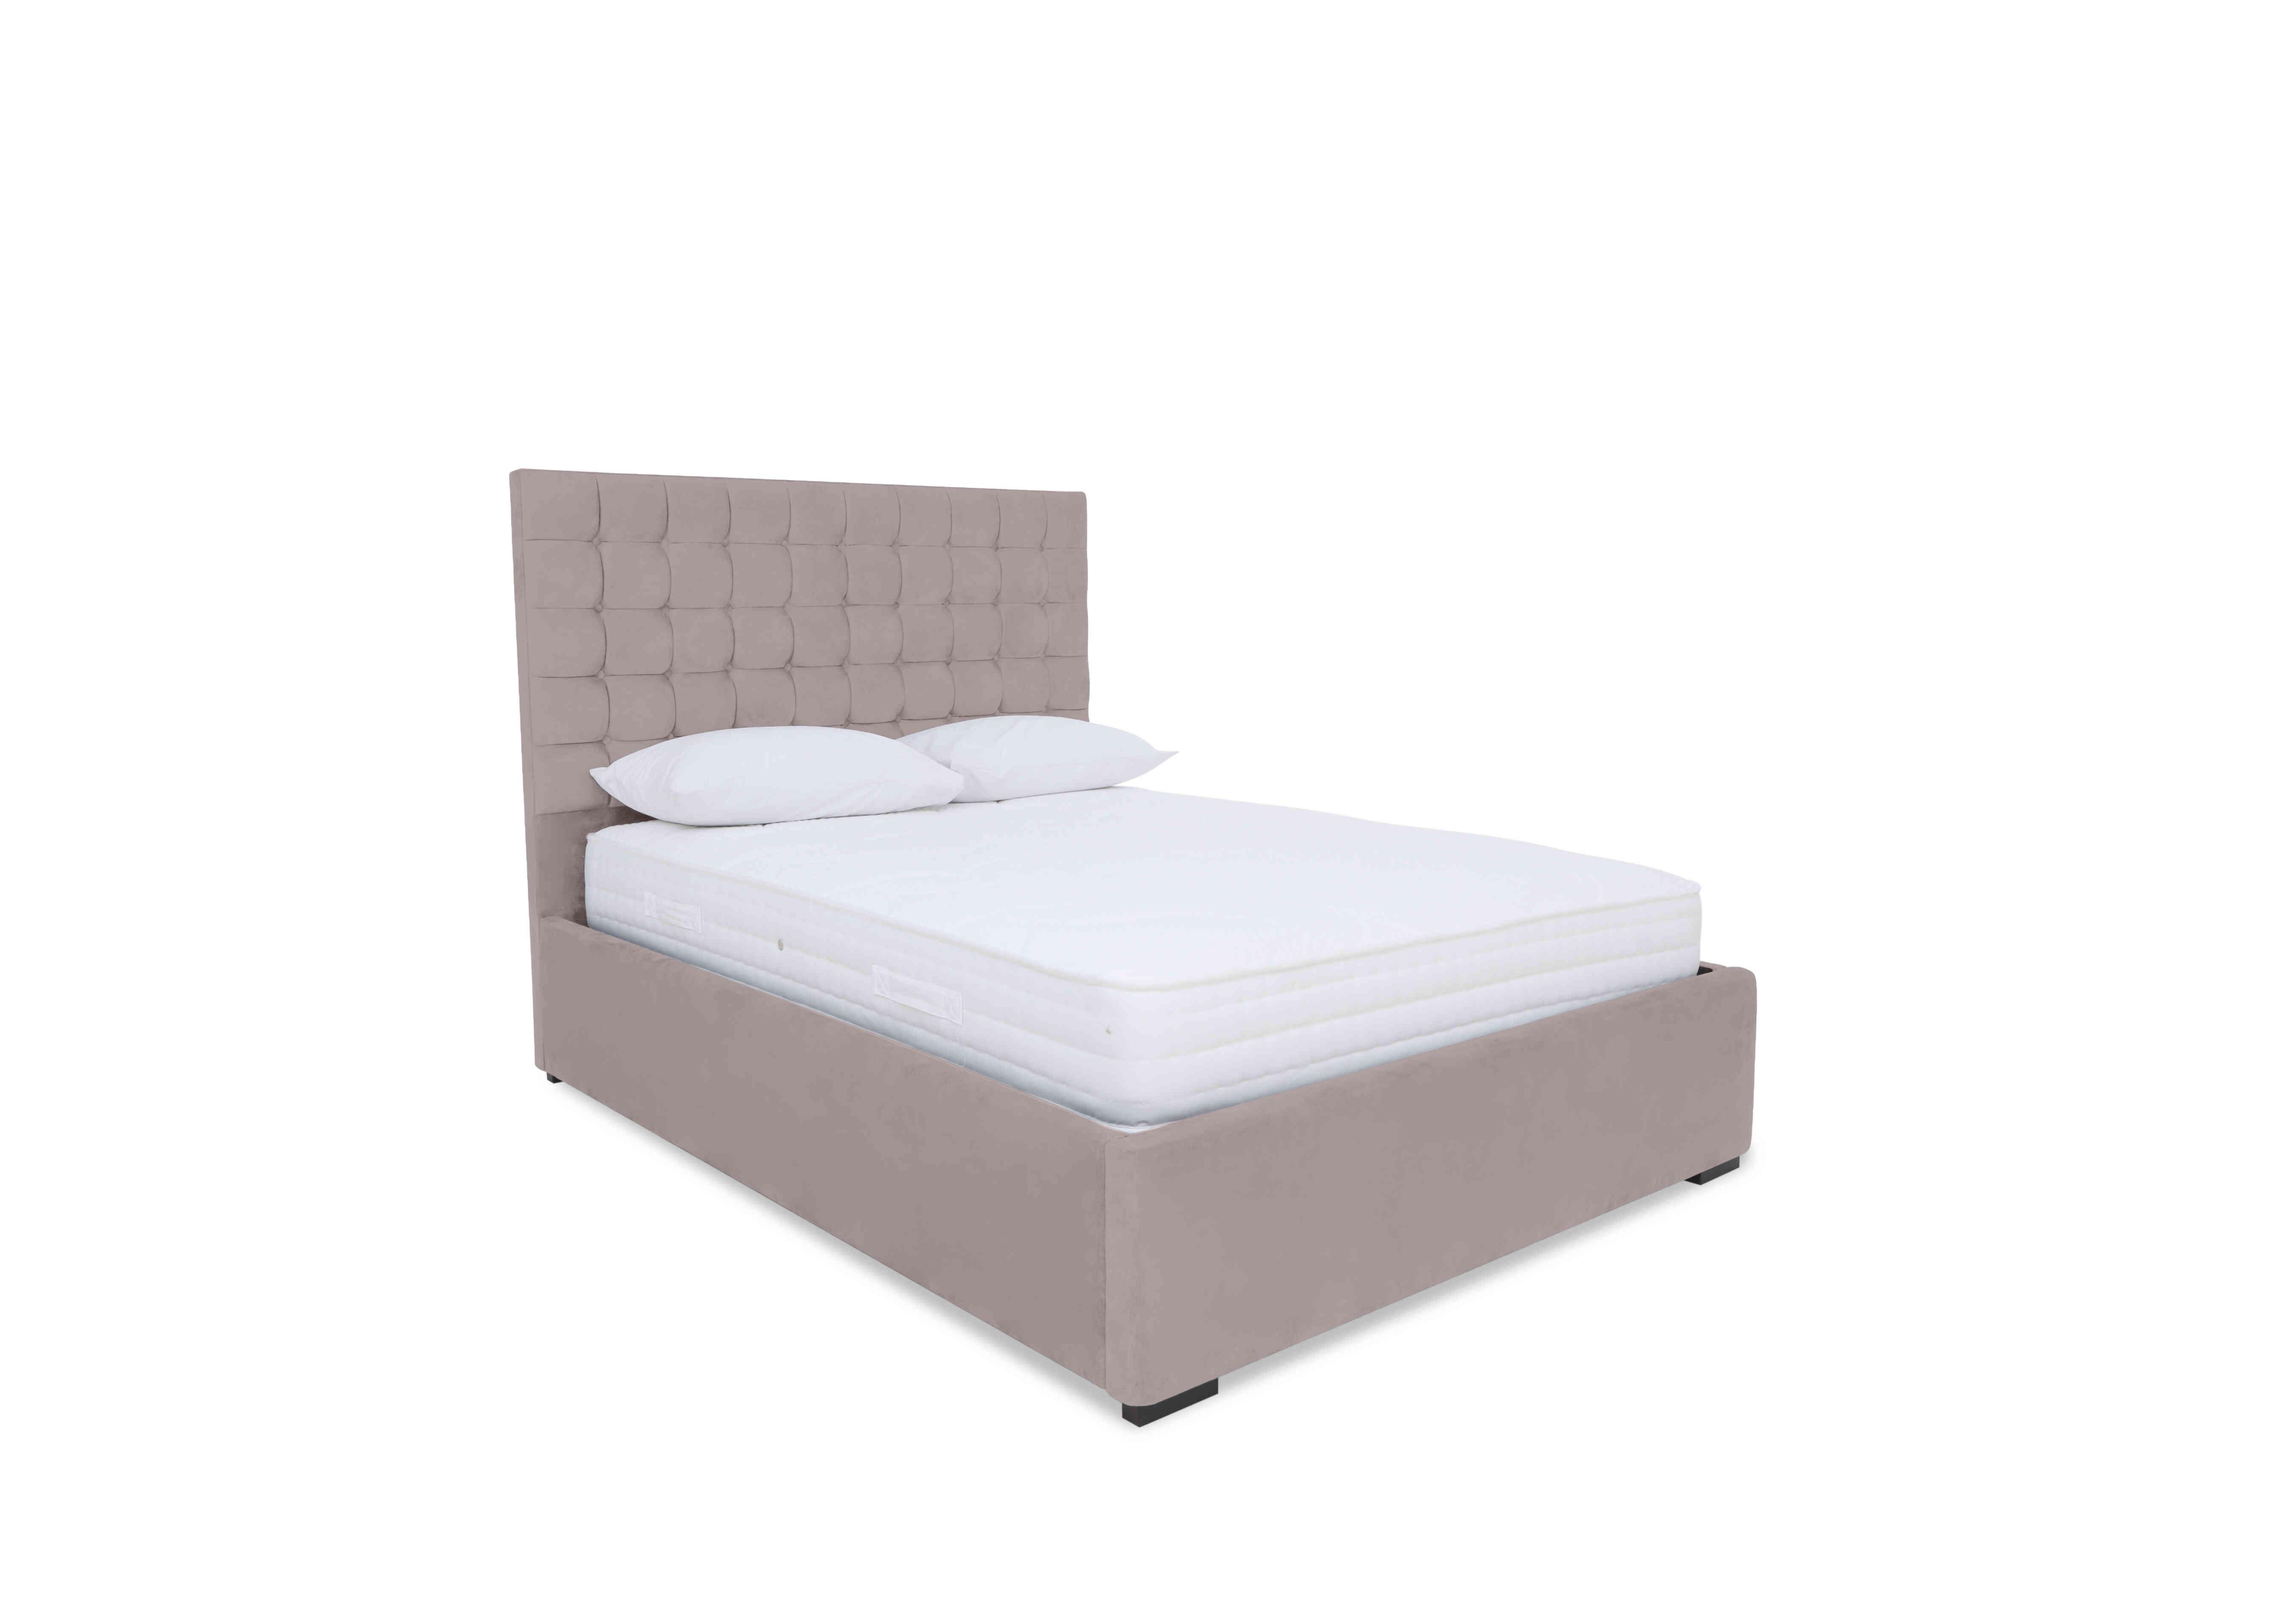 Dice Ottoman Bed Frame in Plush Lilac on Furniture Village